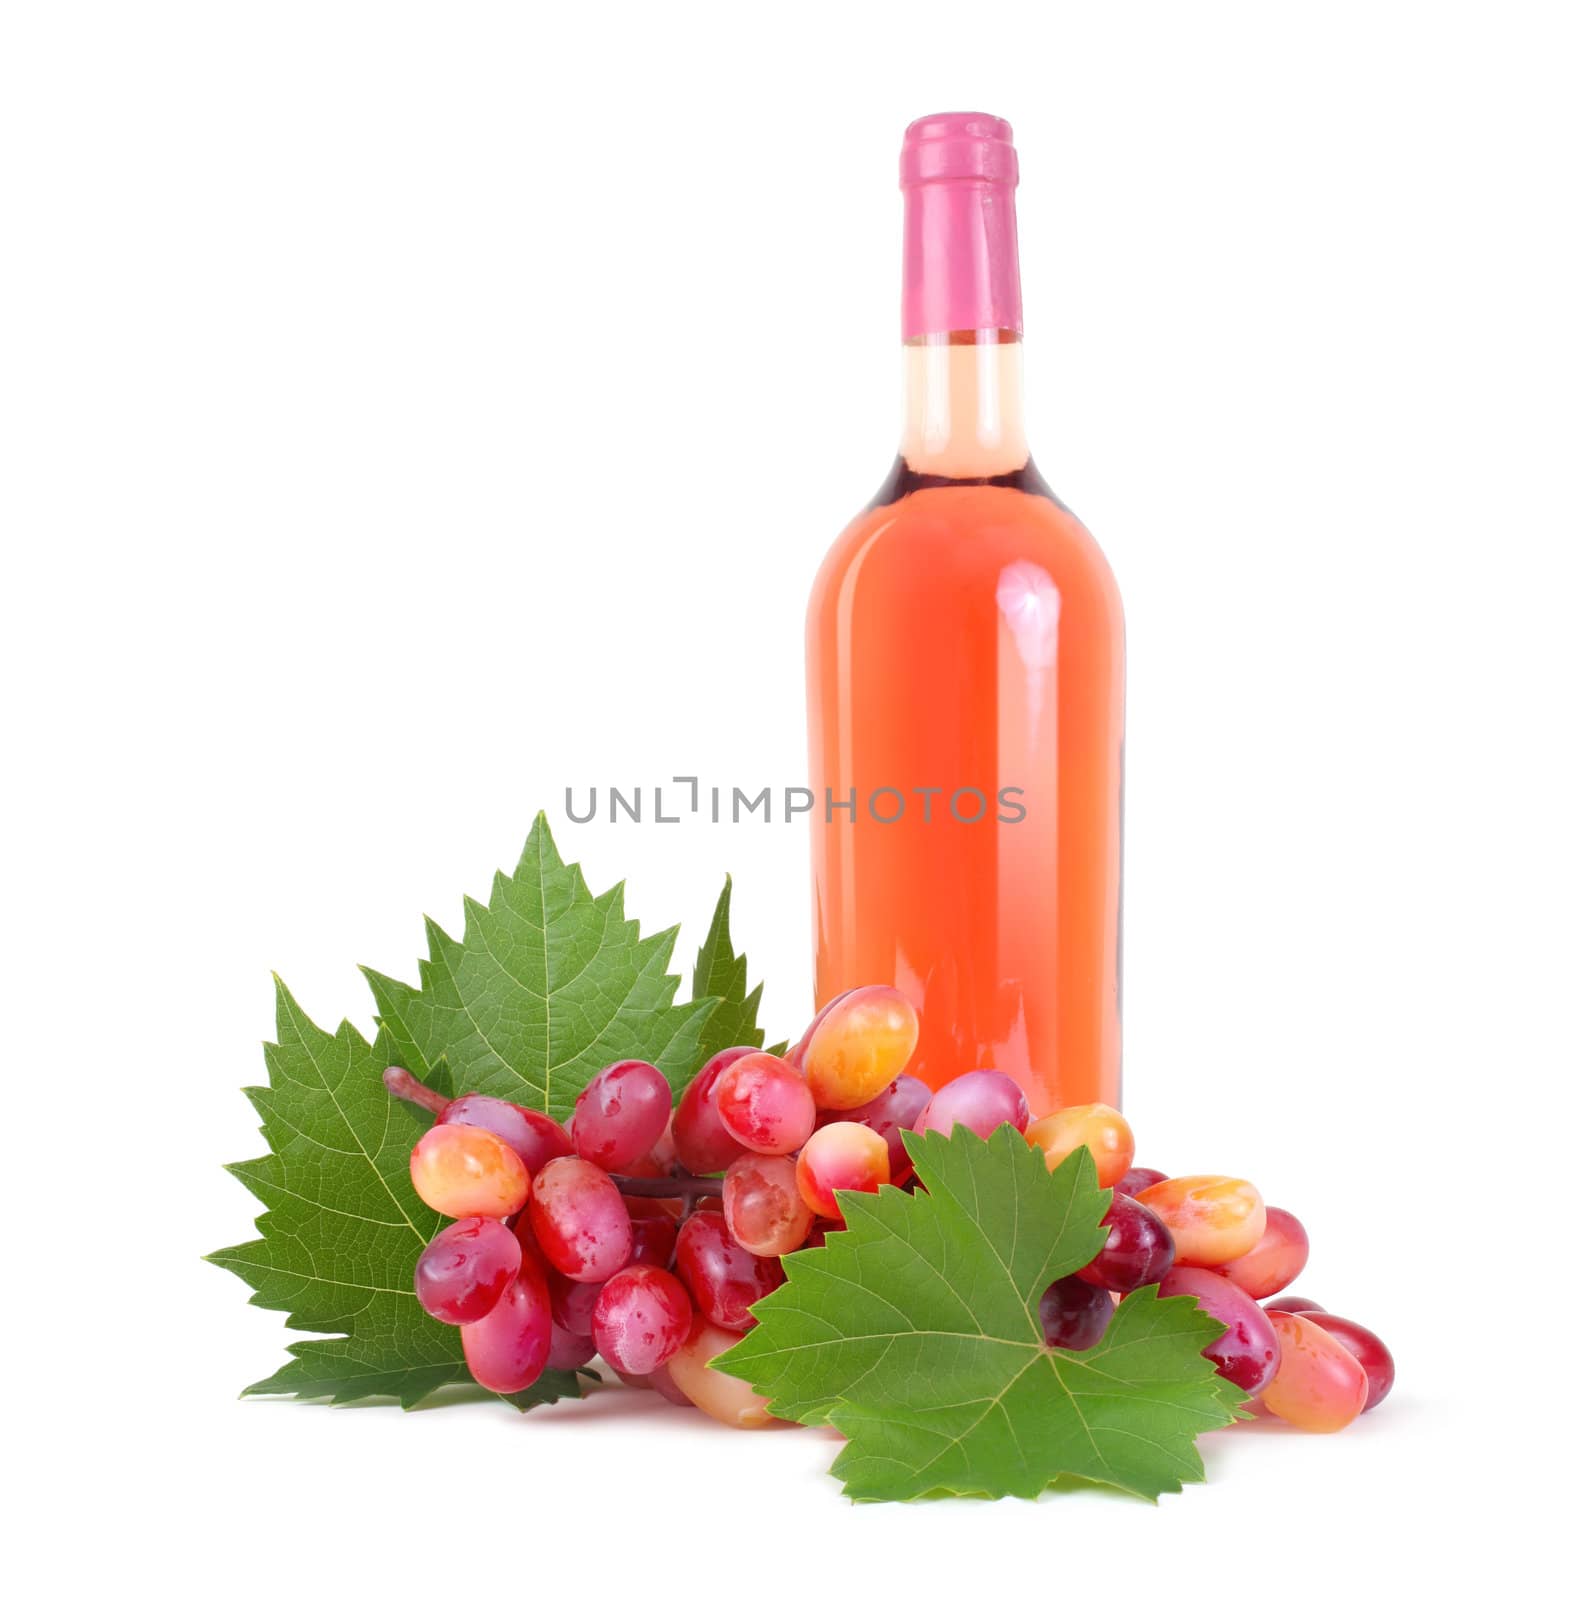 grapes with leaf and rose wine bottle isolated on white by rudchenko